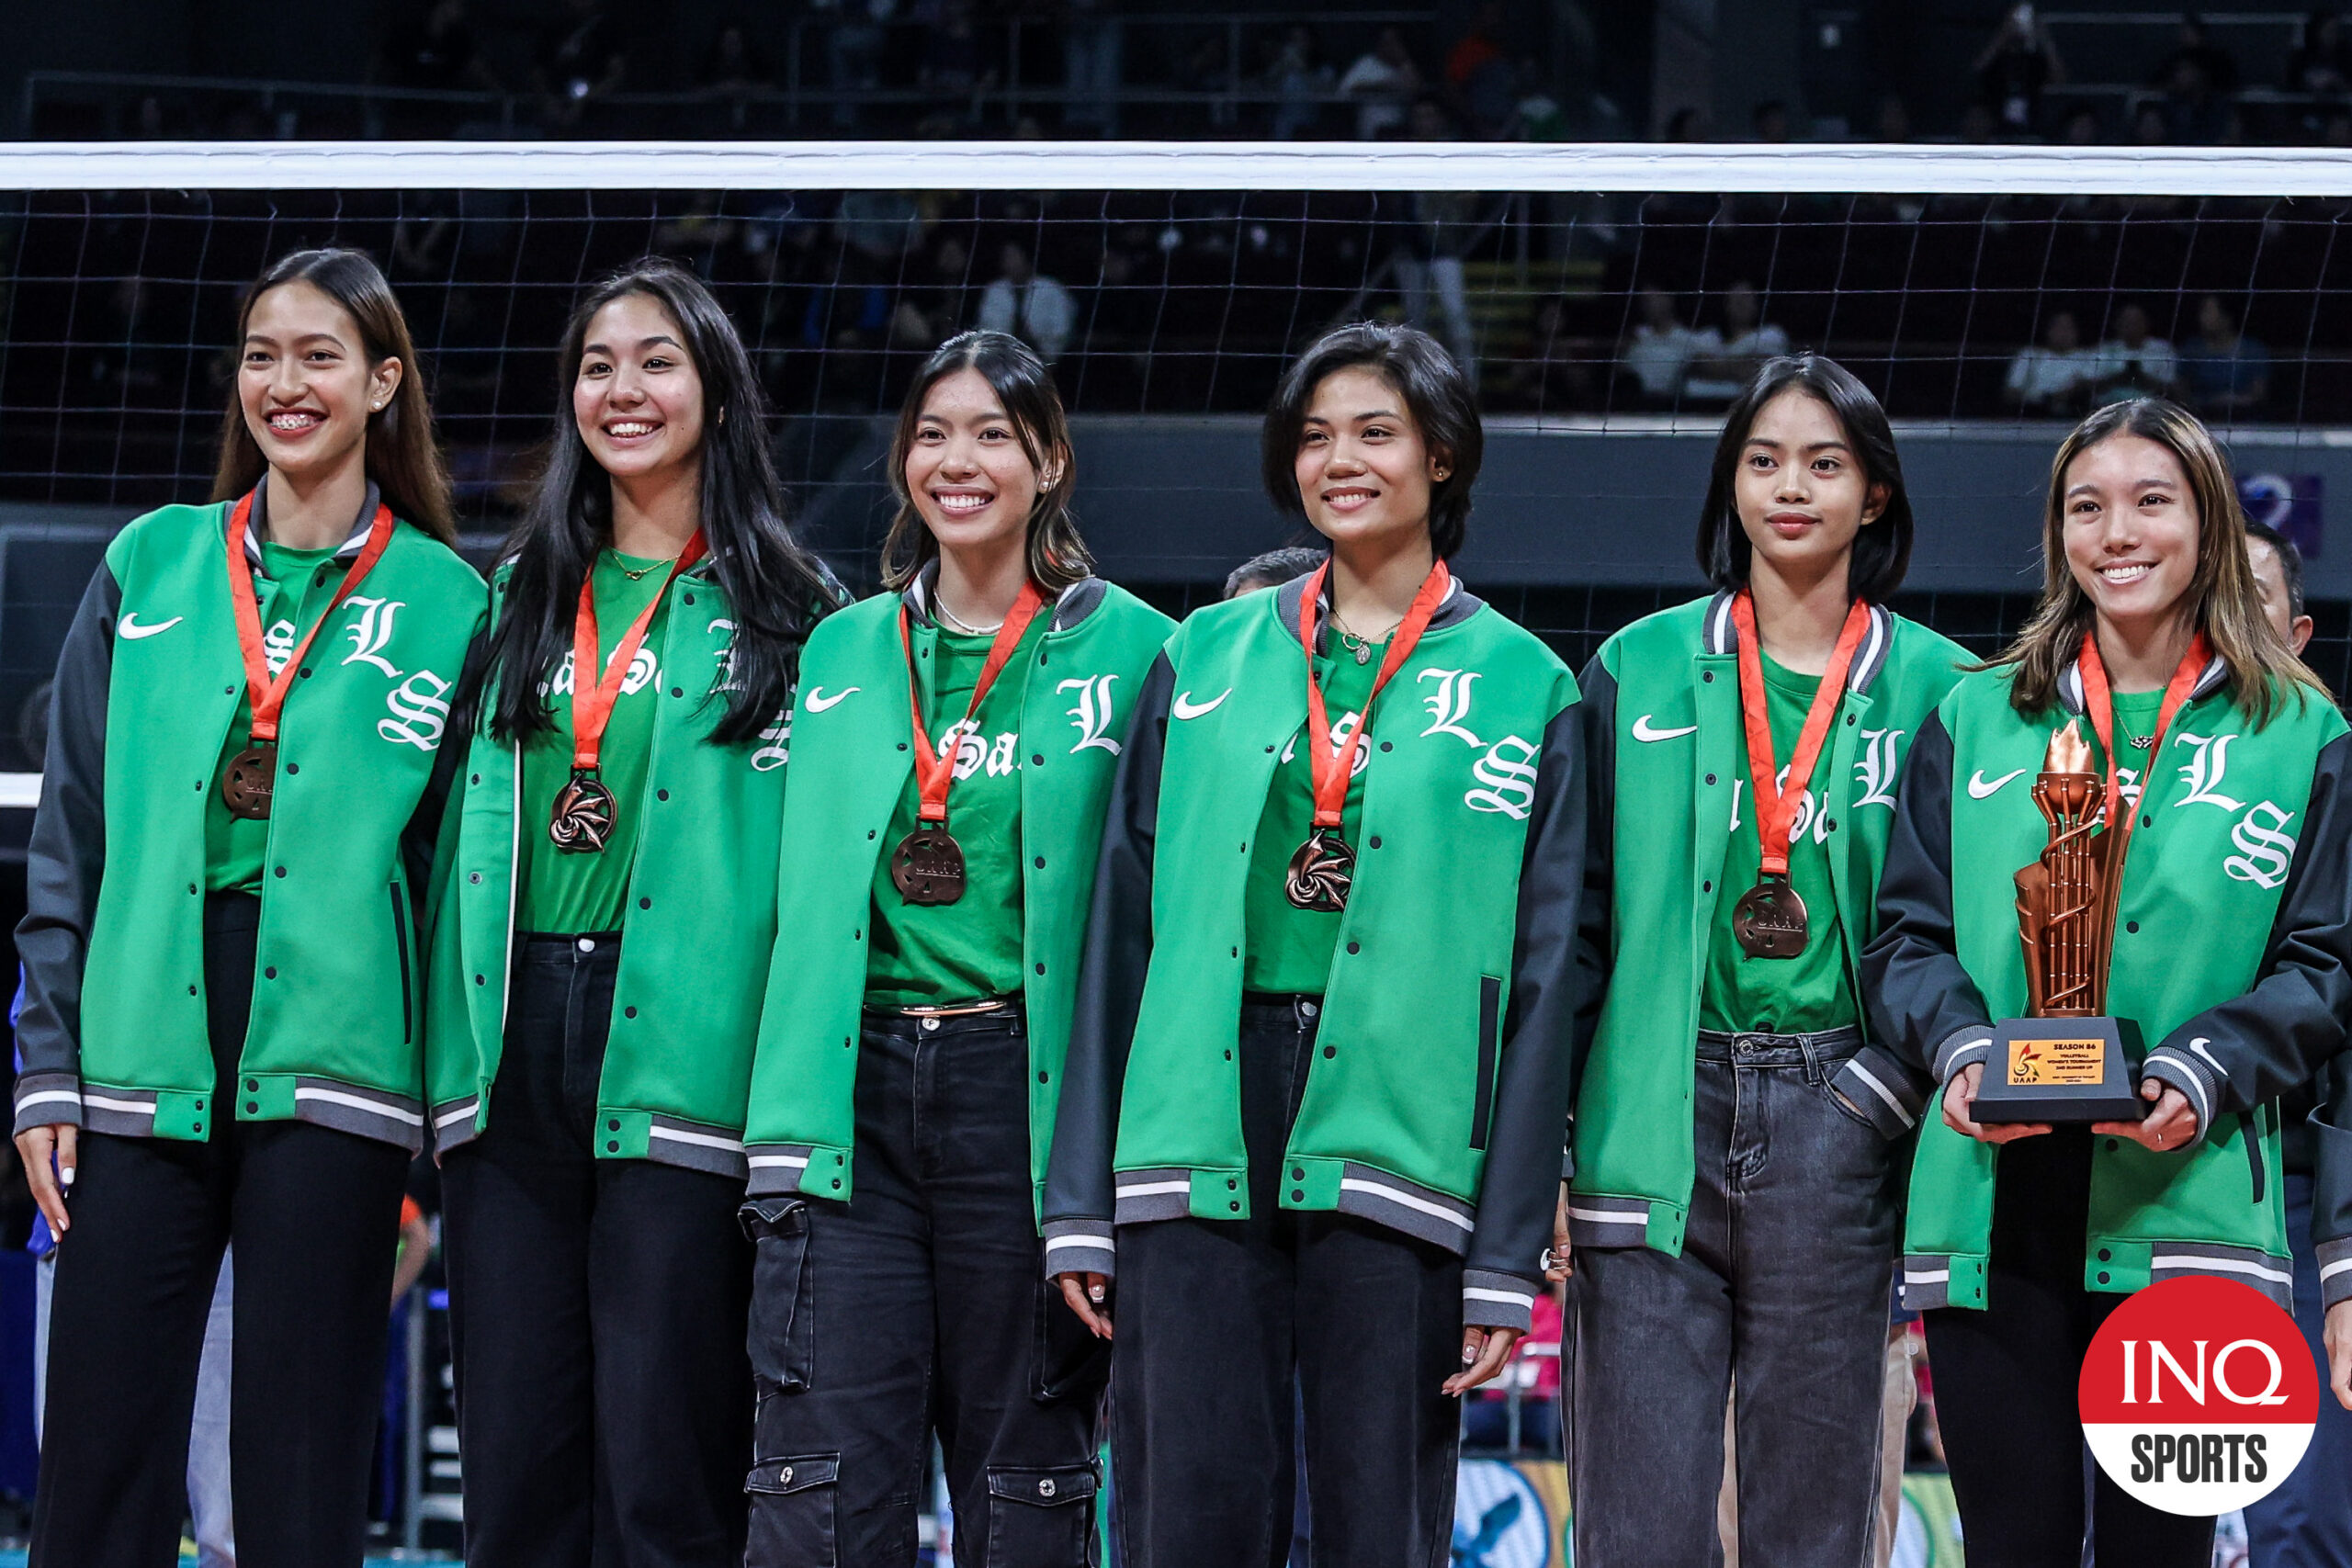 La Salle’s Julia Coronel and Thea Gagate after receiving the Lady Archers' bronze medal in the UAAP Season 86 women's volleyball tournament